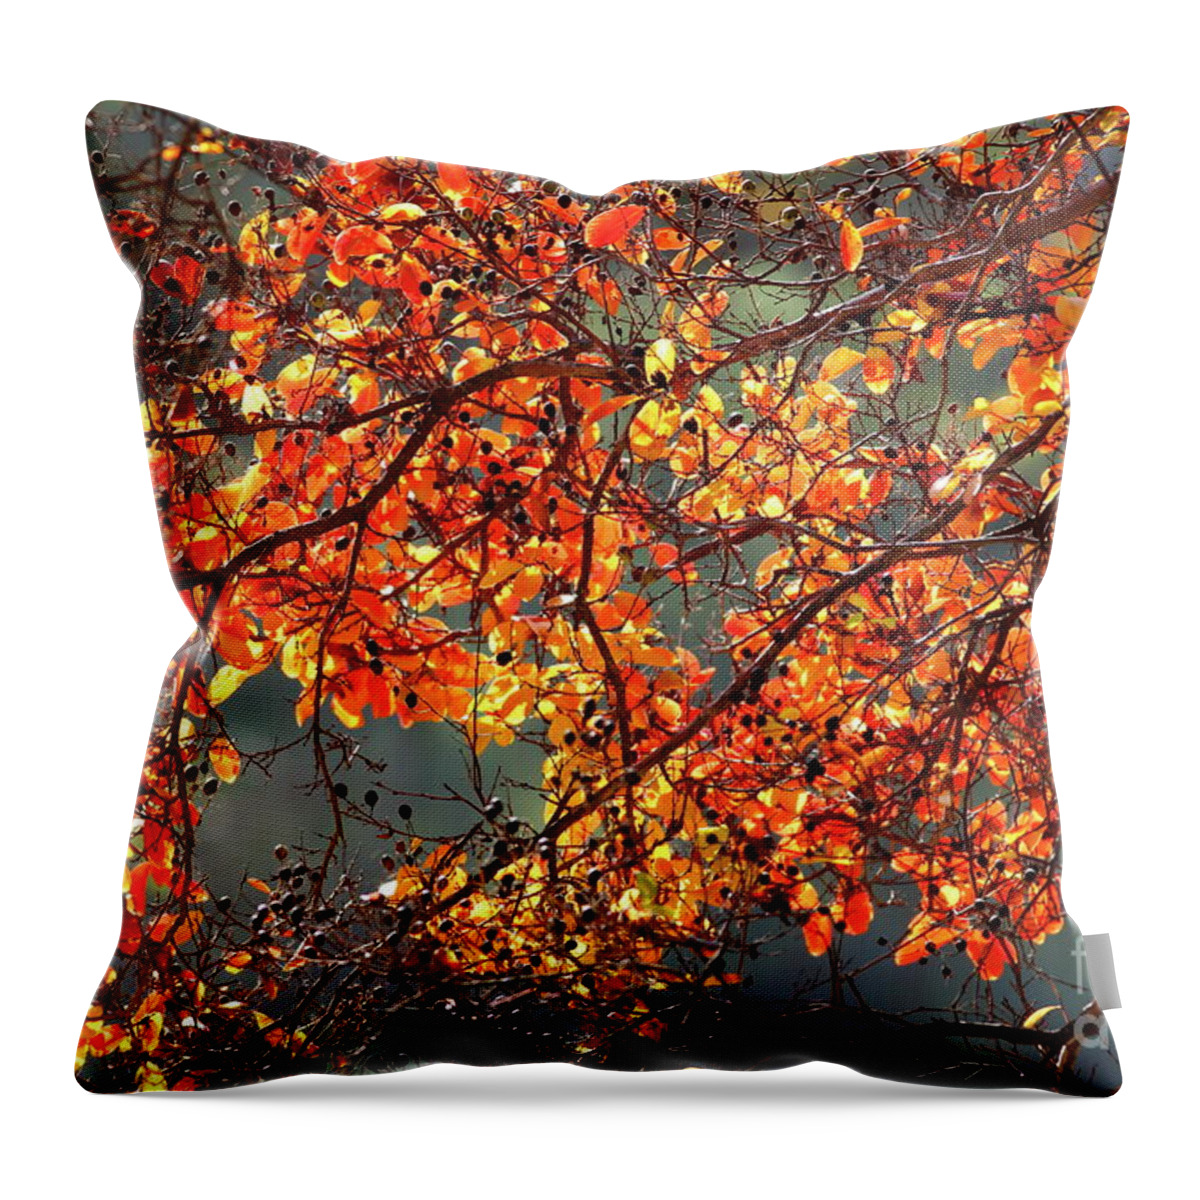 Autumn Throw Pillow featuring the photograph Fall Leaves #2 by Nicholas Burningham